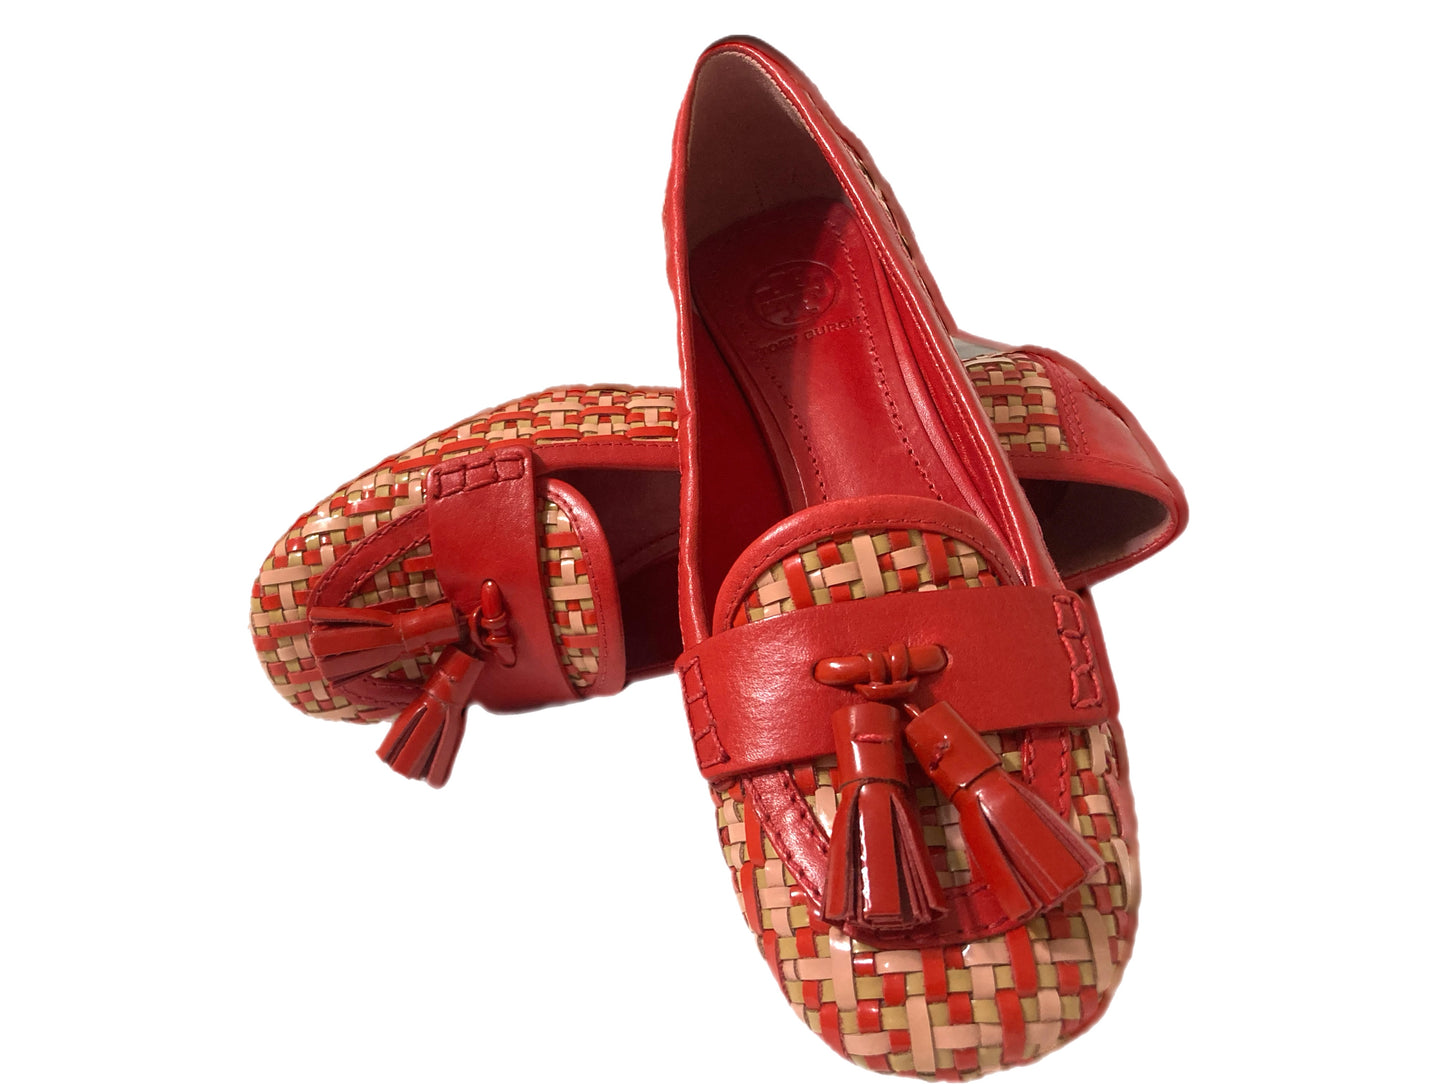 TORY BURCH Leather Woven Tassel Pumps Red Size 6.5